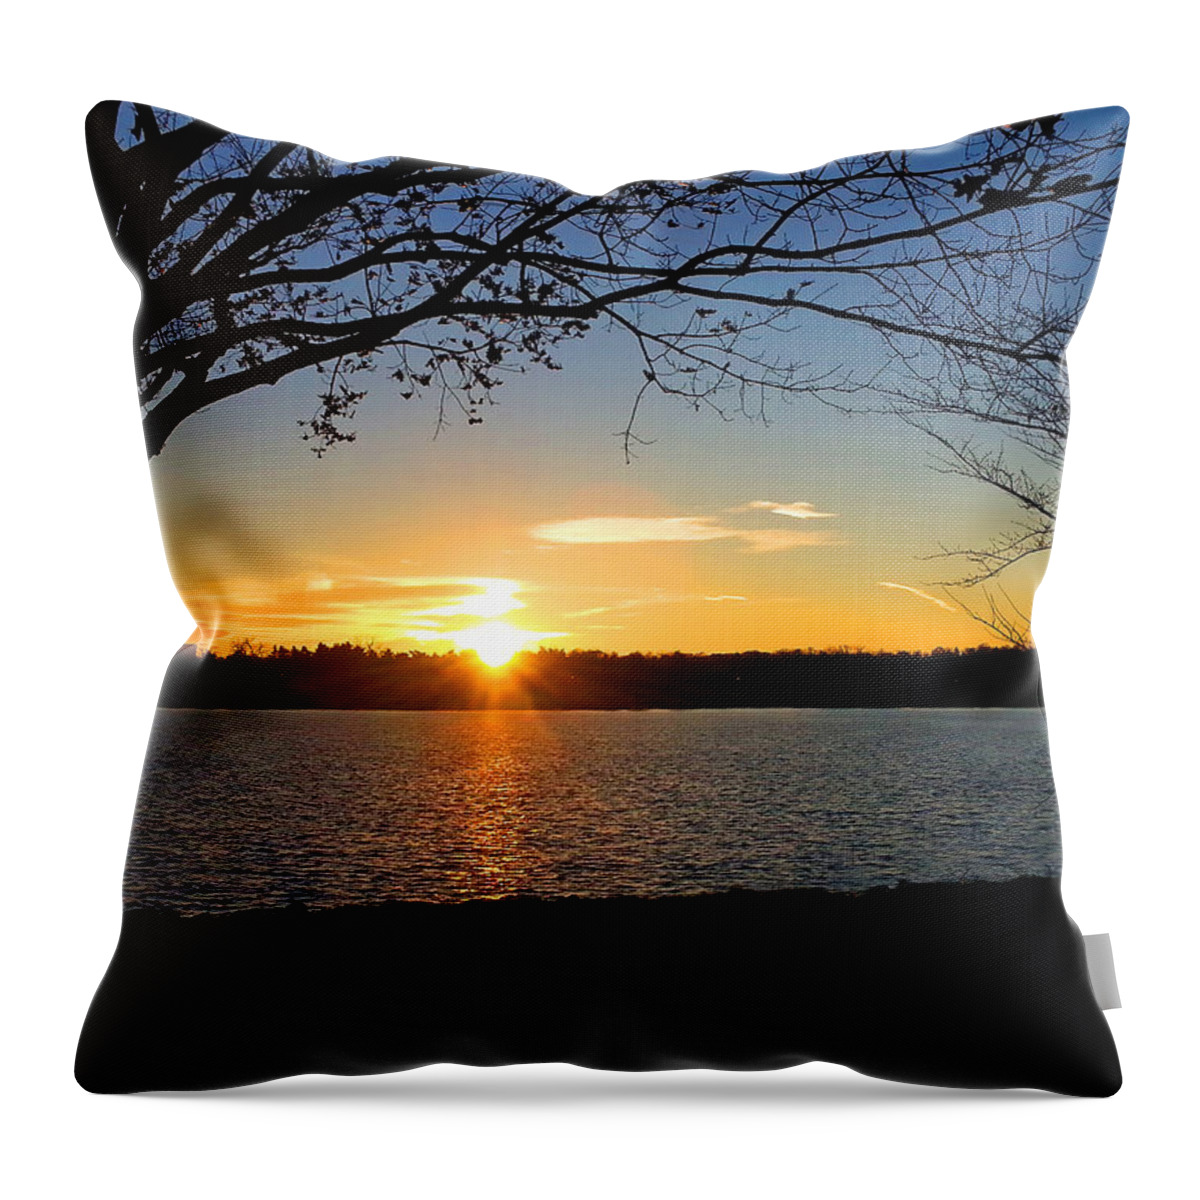 Sunsets Photographs Throw Pillow featuring the photograph Sunset On The Potomac by Emmy Vickers